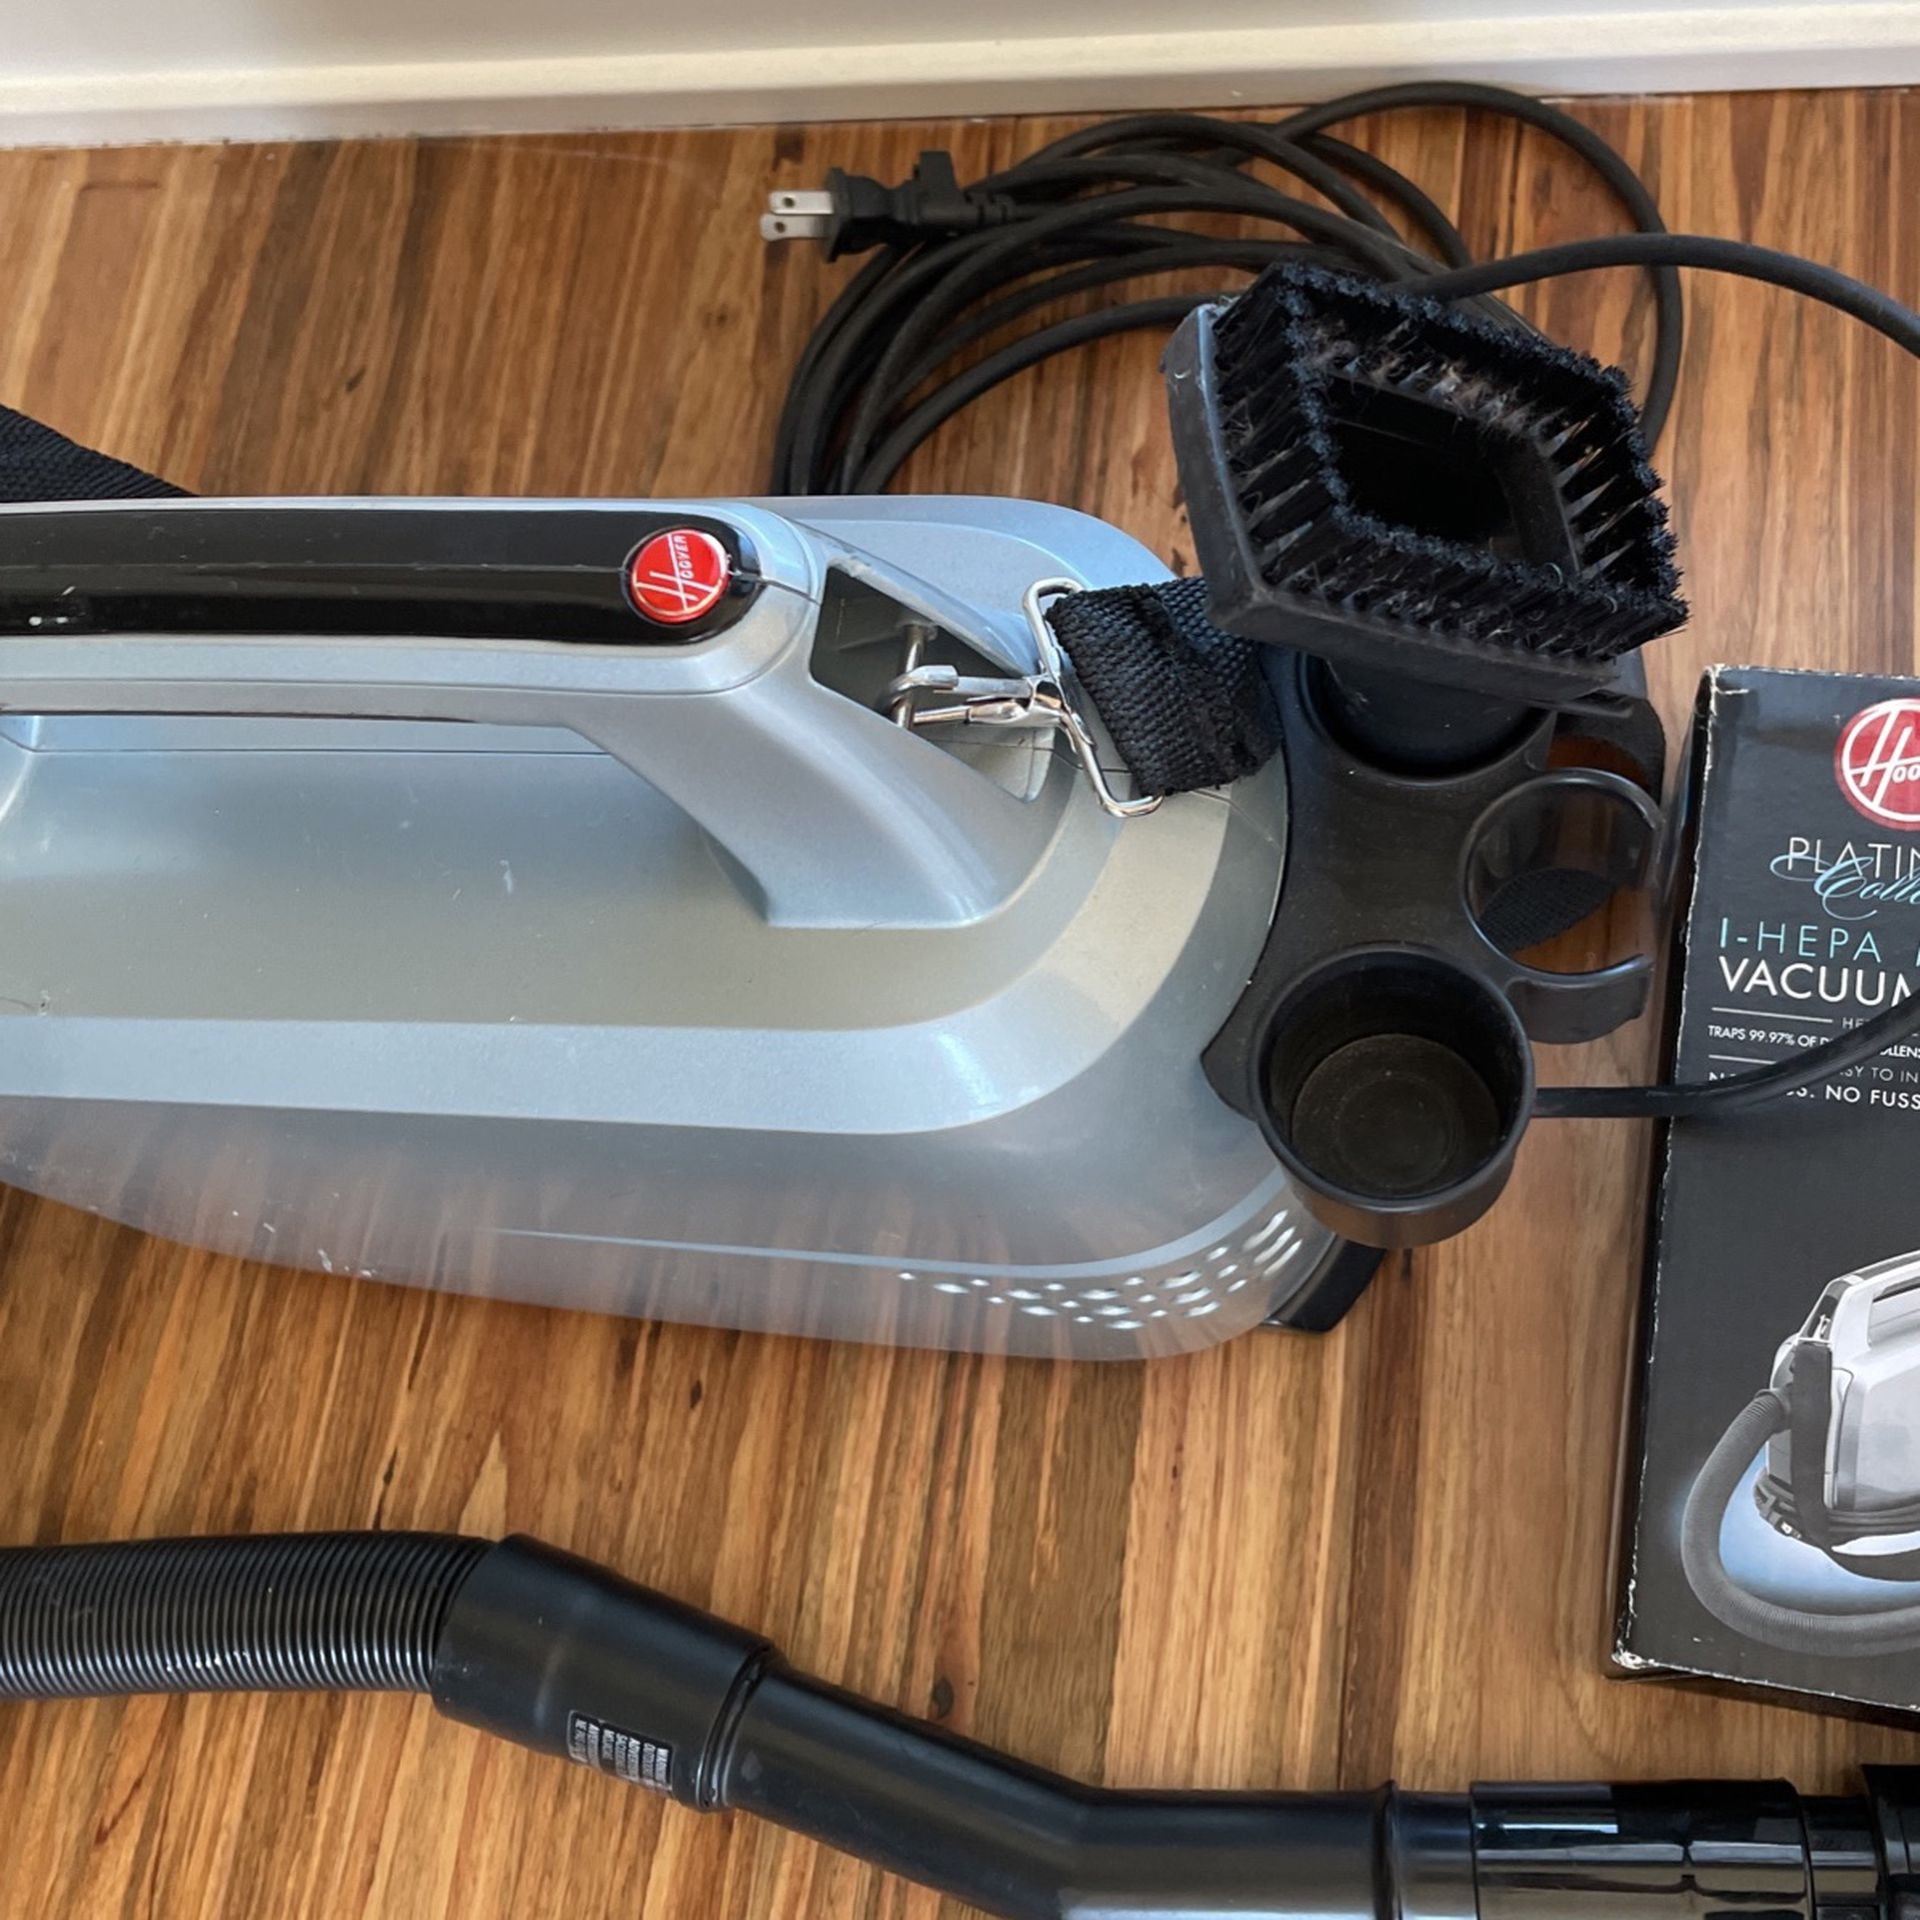 Hoover Platinum Collection Portable Canister Vacuum Cleaner